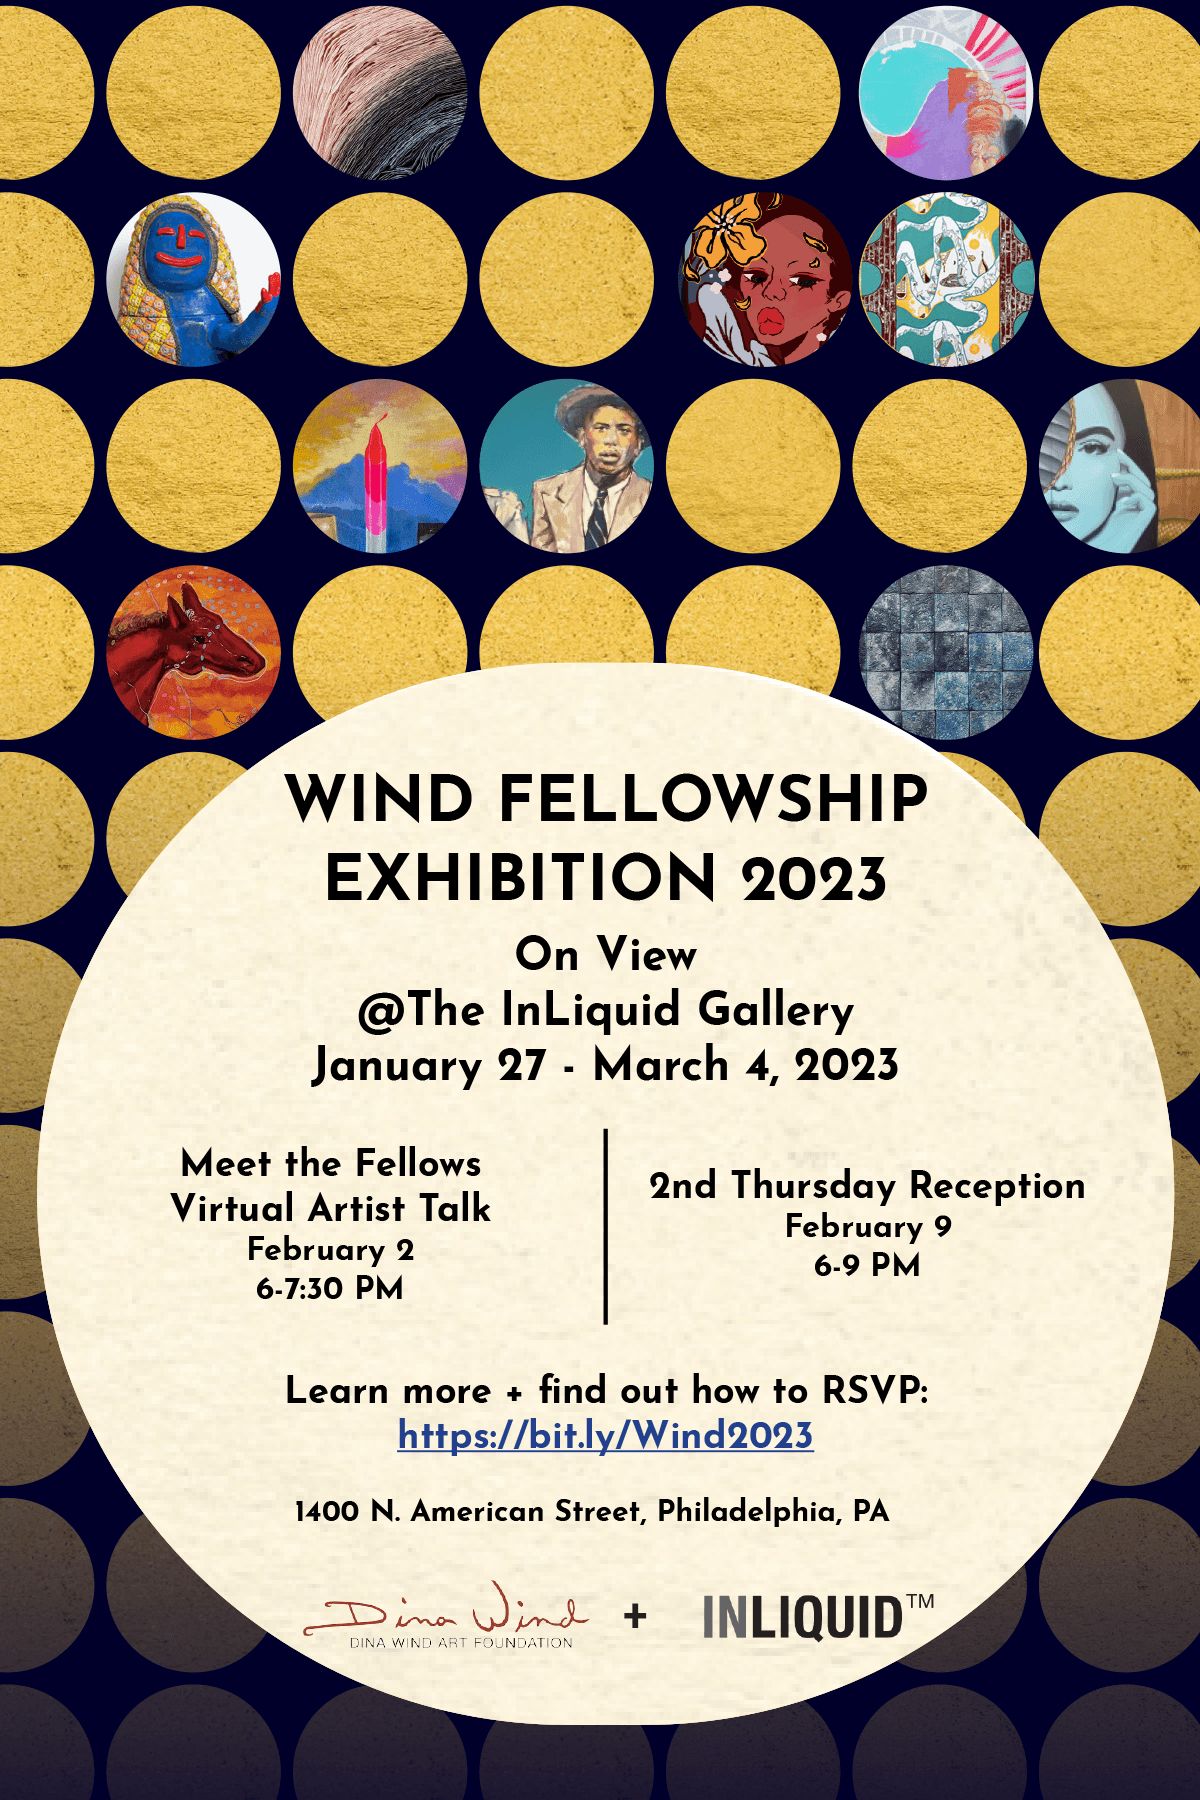 Wind Fellowship Exhibition 2023 On View at The InLiquid Gallery January 27 to March 4